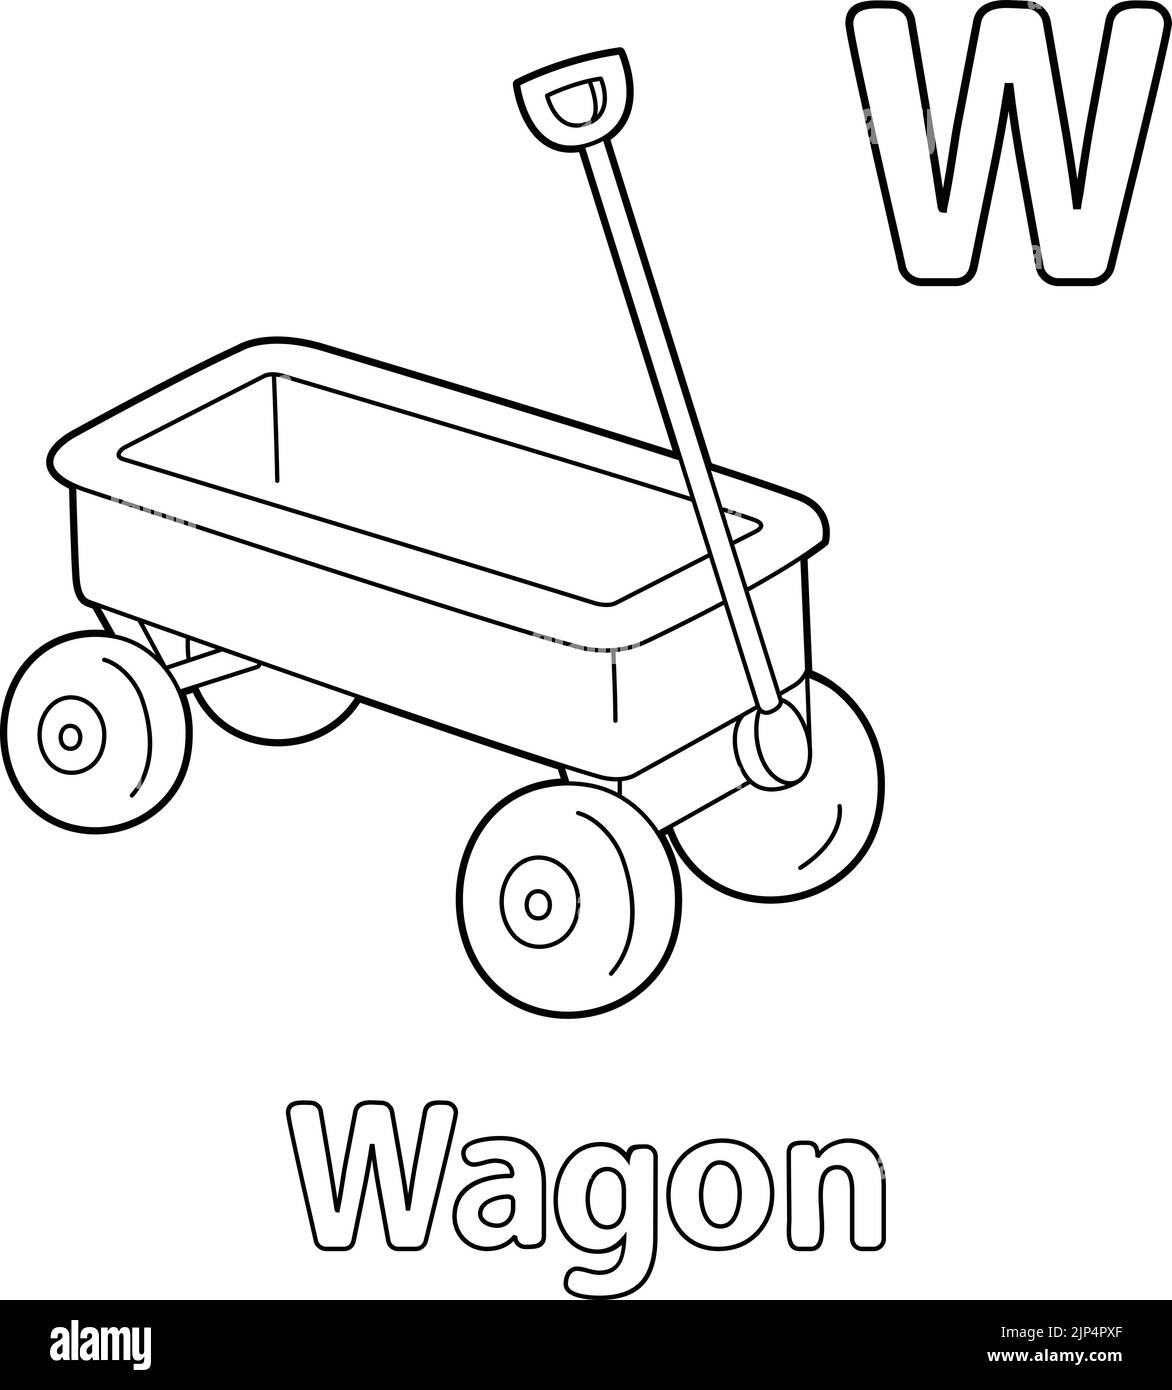 Wagon Alphabet ABC Coloring Page W Stock Vector